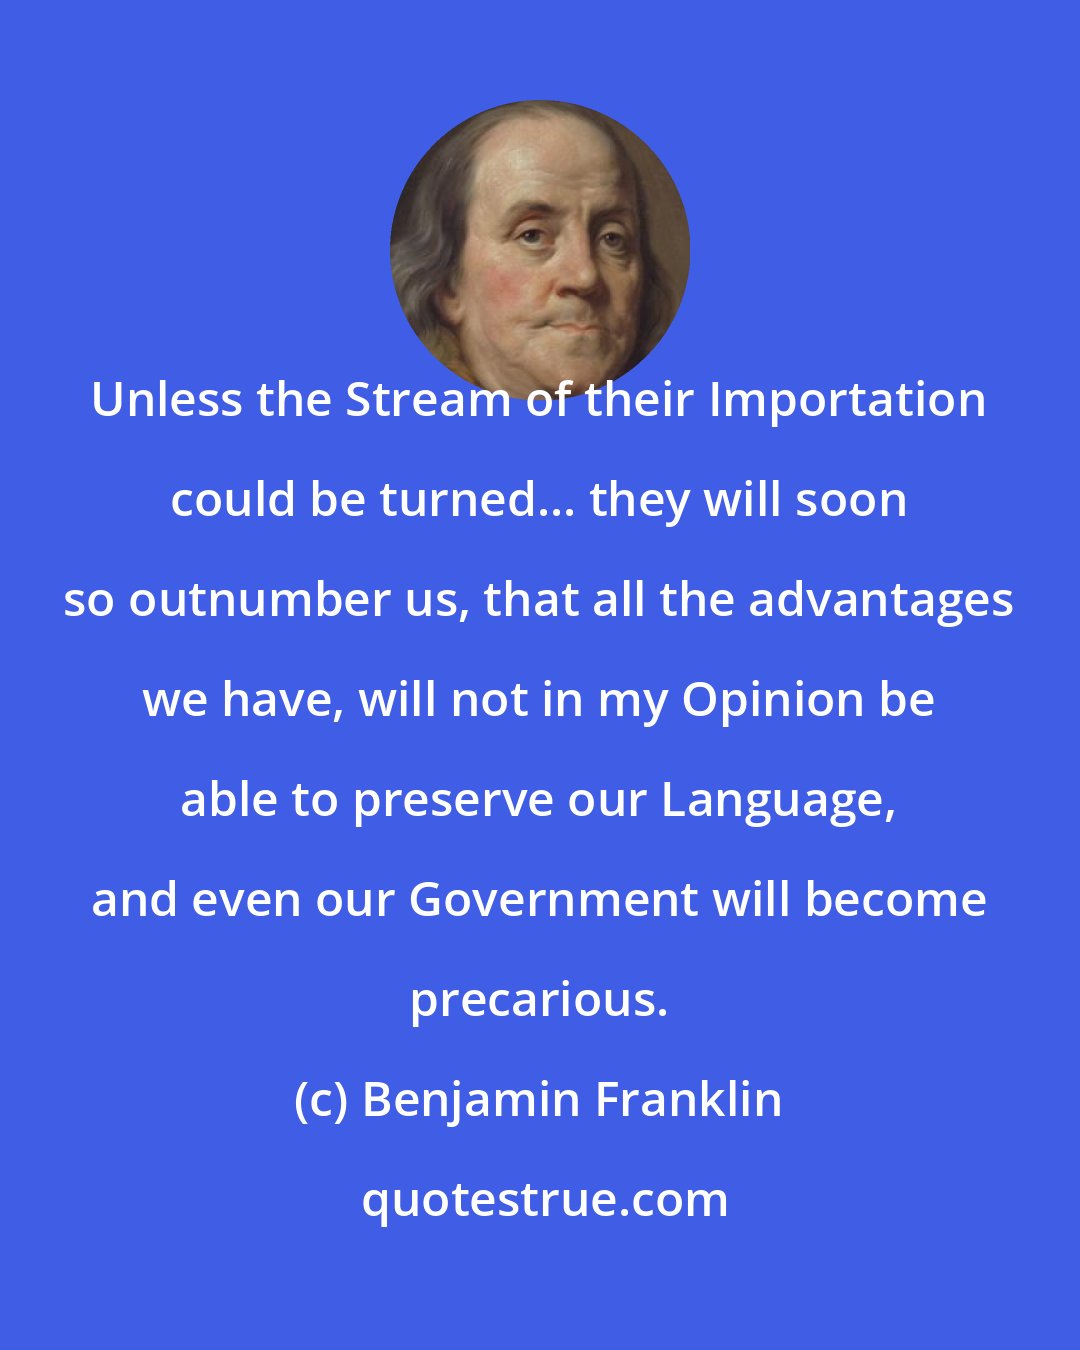 Benjamin Franklin: Unless the Stream of their Importation could be turned... they will soon so outnumber us, that all the advantages we have, will not in my Opinion be able to preserve our Language, and even our Government will become precarious.